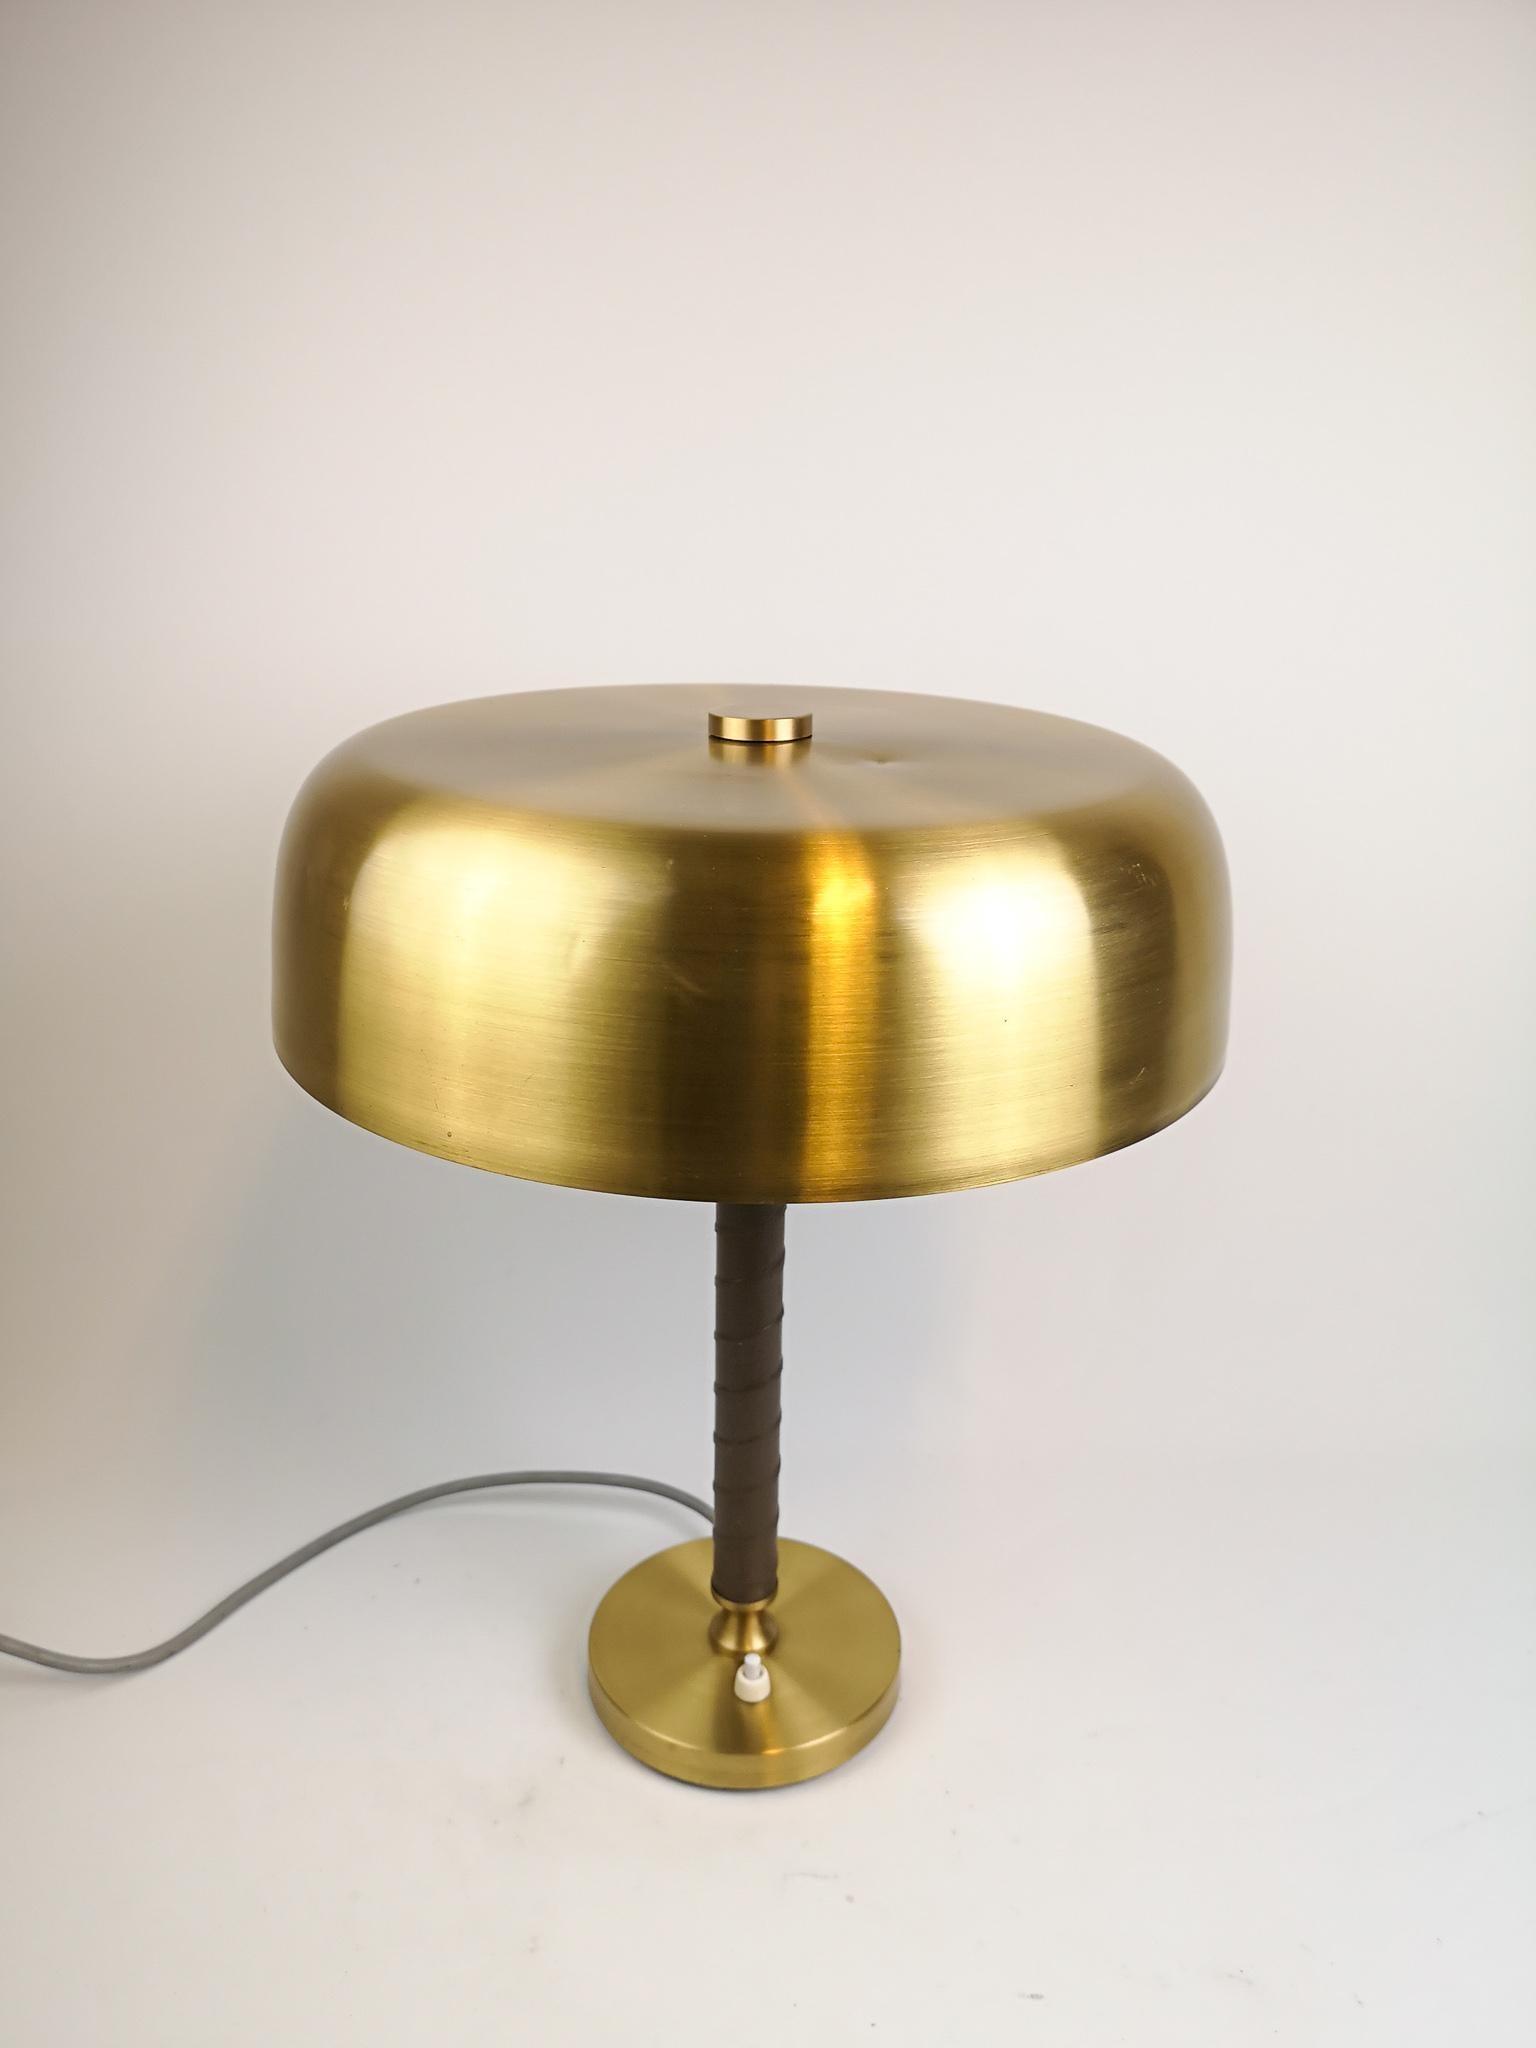 Wonderful table lamp in brushed brass and leather by Boréns, Sweden.
The lamp is the perfect office lamp or for that place that a solid and good impression is important. 

Condition: Good original condition with a few scratches and minor dents.
